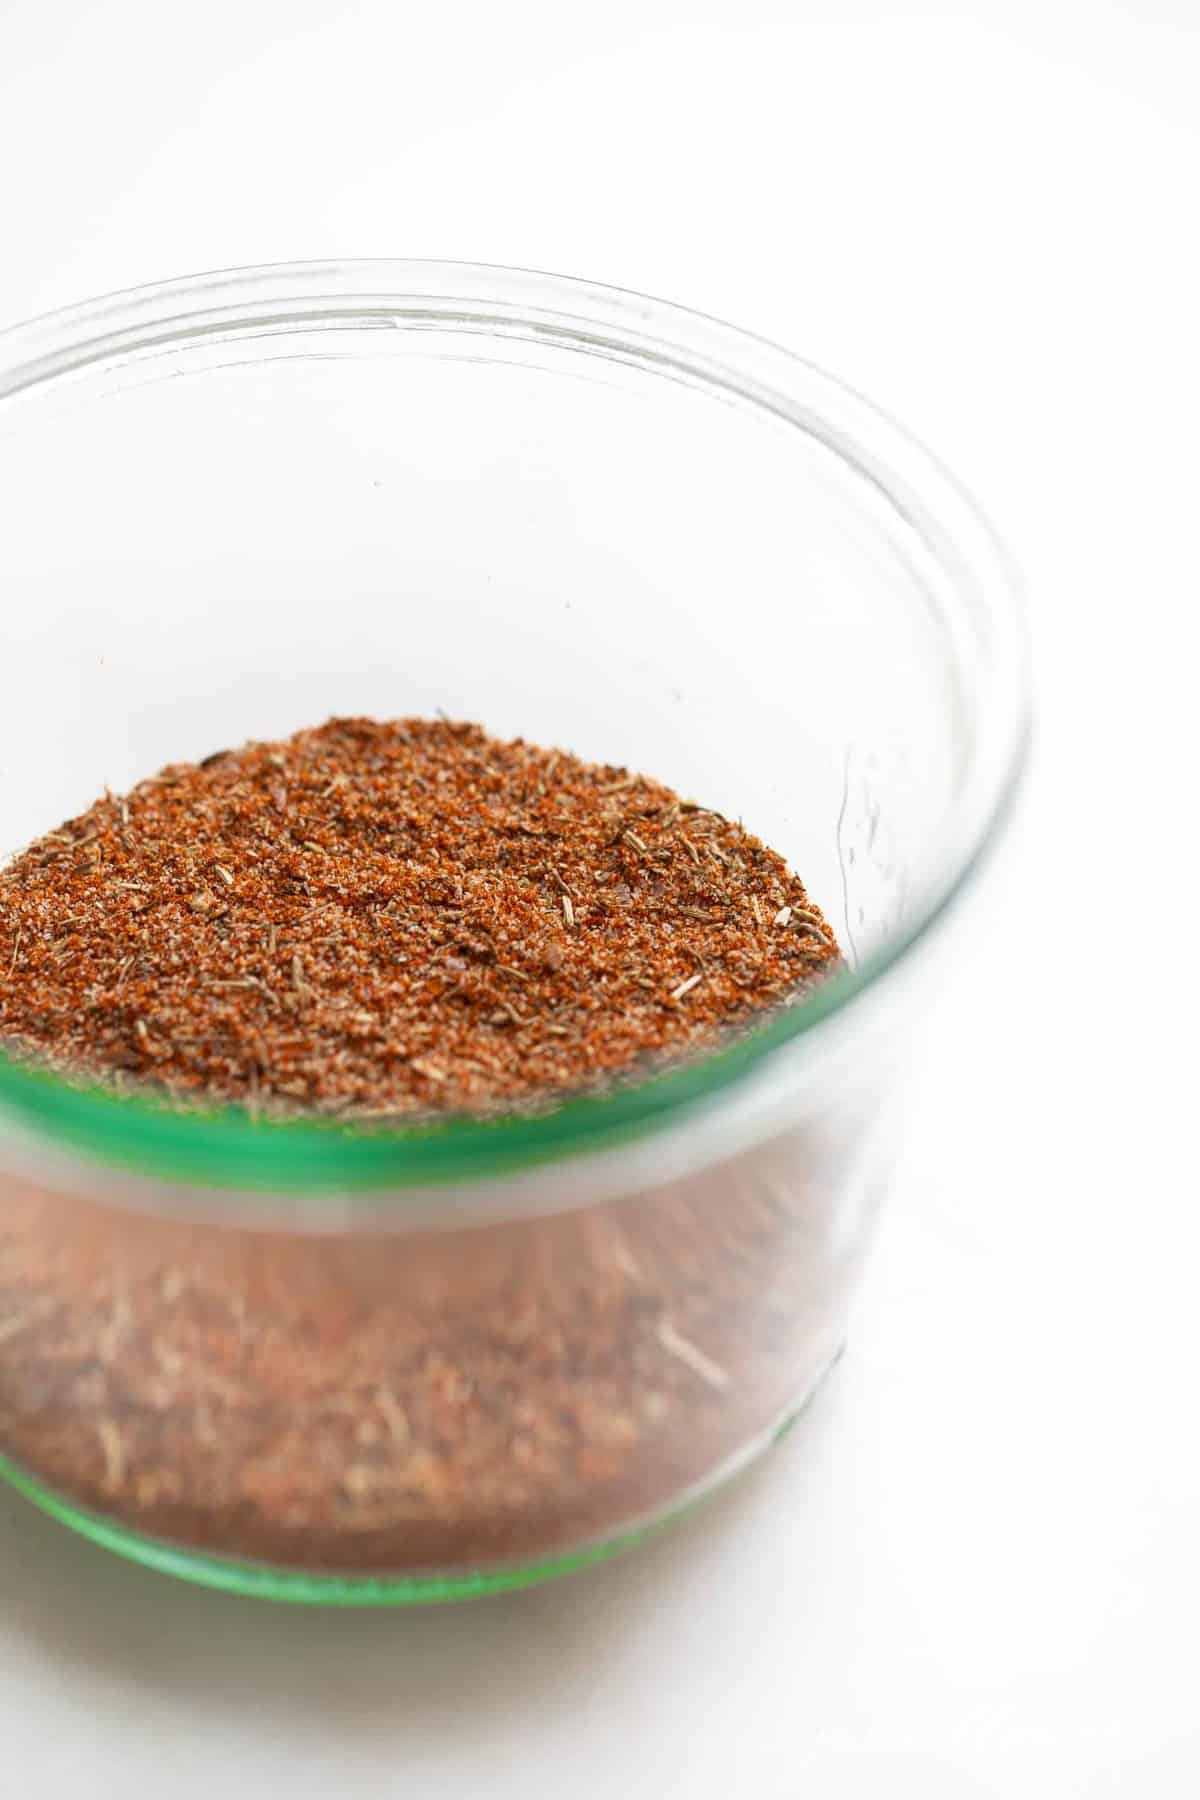 Blackened seasoning blend in a clear bowl on a white surface.